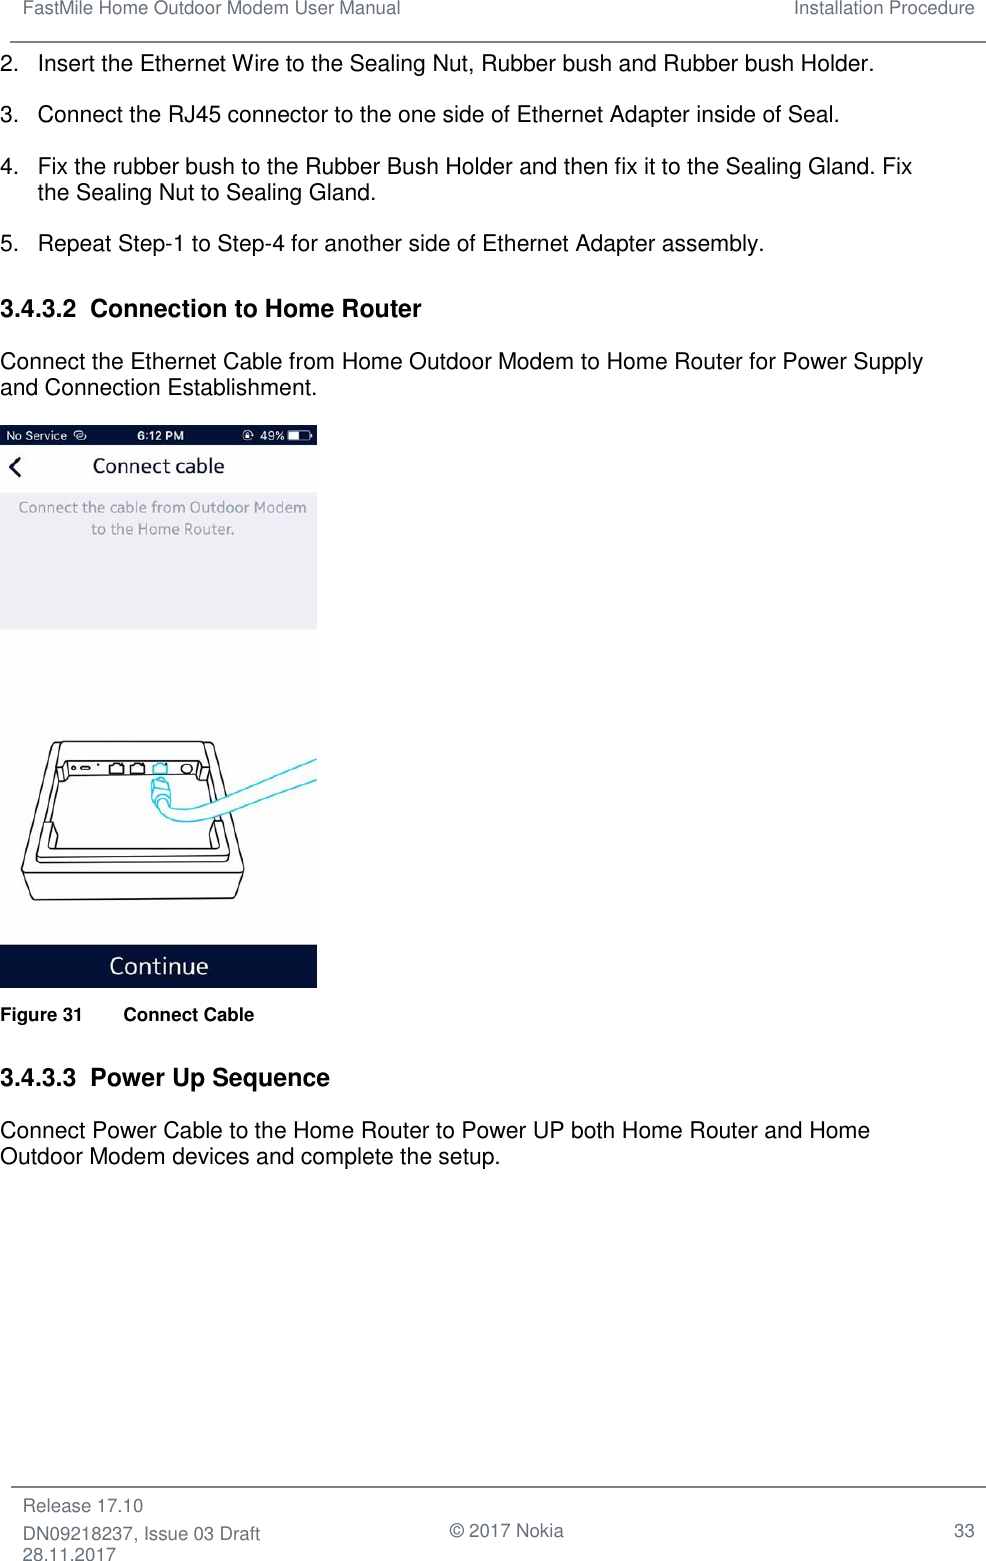 FastMile Home Outdoor Modem User Manual Installation Procedure  Release 17.10 DN09218237, Issue 03 Draft 28.11.2017                                © 2017 Nokia 33  2.  Insert the Ethernet Wire to the Sealing Nut, Rubber bush and Rubber bush Holder. 3.  Connect the RJ45 connector to the one side of Ethernet Adapter inside of Seal. 4.  Fix the rubber bush to the Rubber Bush Holder and then fix it to the Sealing Gland. Fix the Sealing Nut to Sealing Gland. 5.  Repeat Step-1 to Step-4 for another side of Ethernet Adapter assembly. 3.4.3.2  Connection to Home Router Connect the Ethernet Cable from Home Outdoor Modem to Home Router for Power Supply and Connection Establishment.  Figure 31   Connect Cable 3.4.3.3  Power Up Sequence Connect Power Cable to the Home Router to Power UP both Home Router and Home Outdoor Modem devices and complete the setup. 